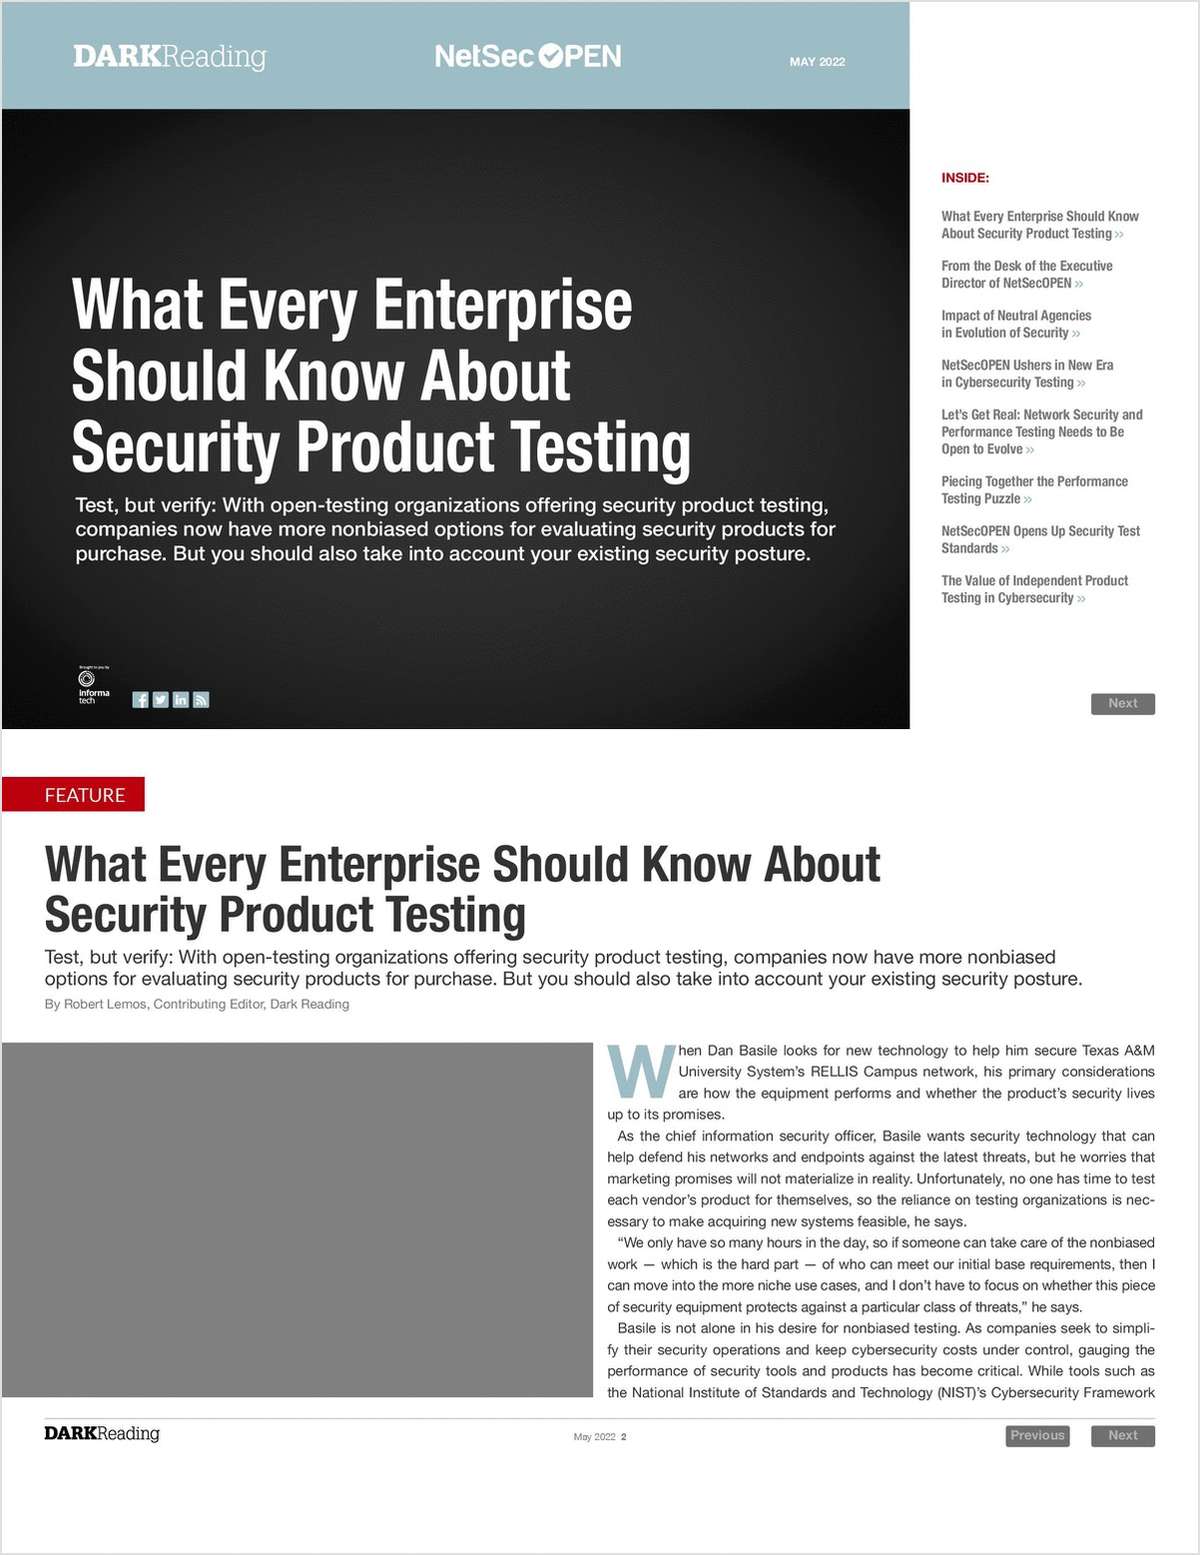 What Every Enterprise Should Know About Security Product Testing